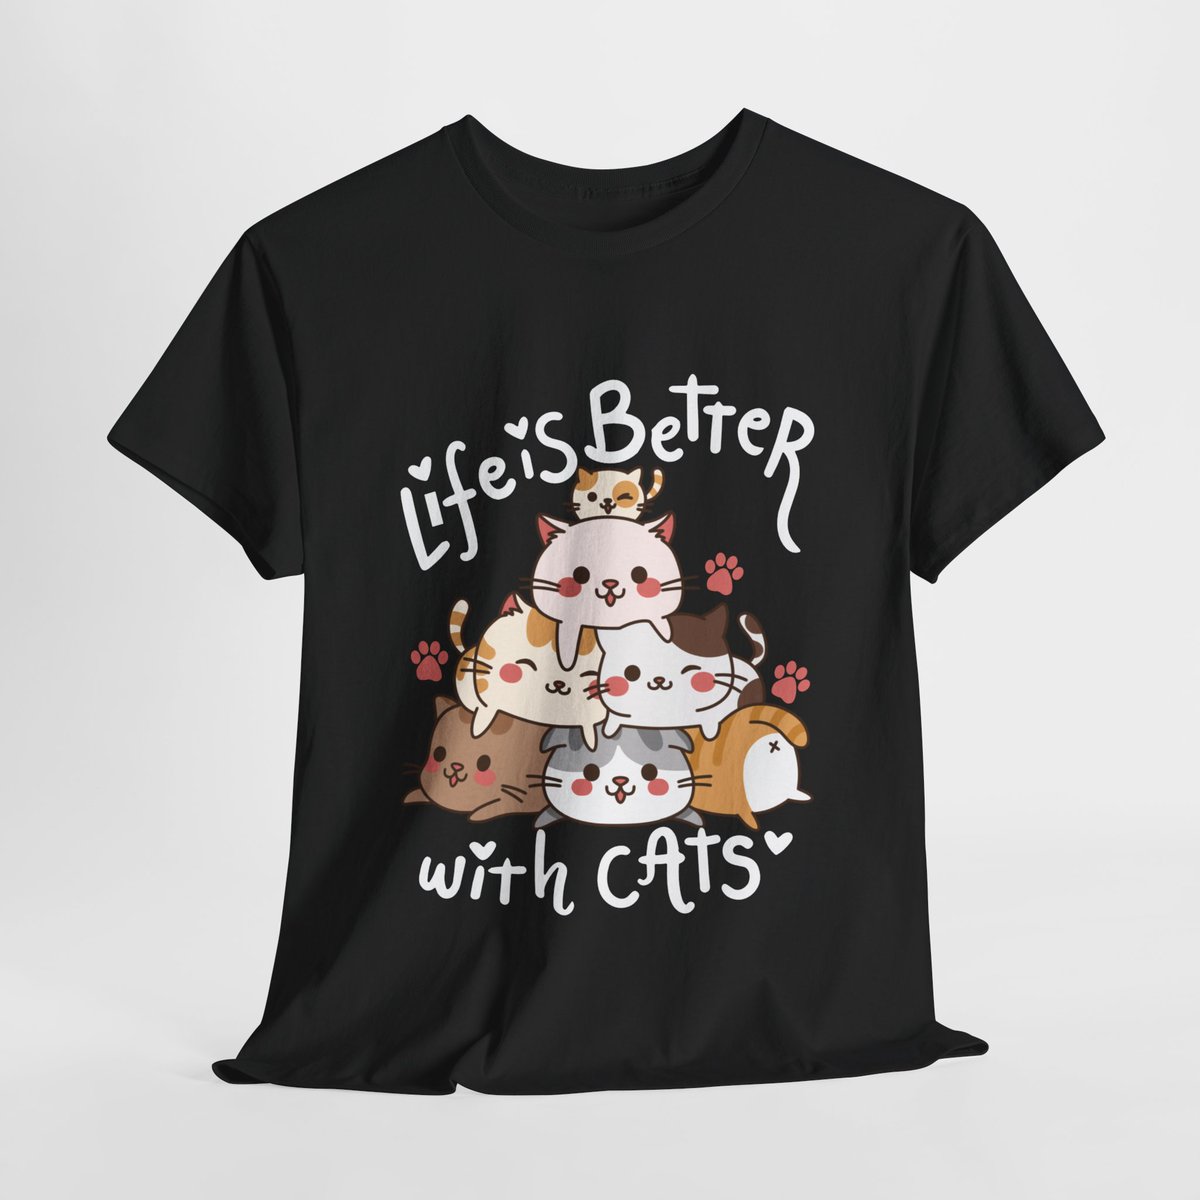 Life is Better with Cats T-Shirt- Express Delivery available
😻 Cat Lovers Rejoice! These Tees Will Speak to Your Feline Soul! 🐾
🎁 $16.85 💕 Shop Now 👇👇👇
hatala-pets-shop.printify.me/product/710161… 
#catsloversworld #catslove #catsarelife #catsworld #catsfollowers #cats #catslover #catslife